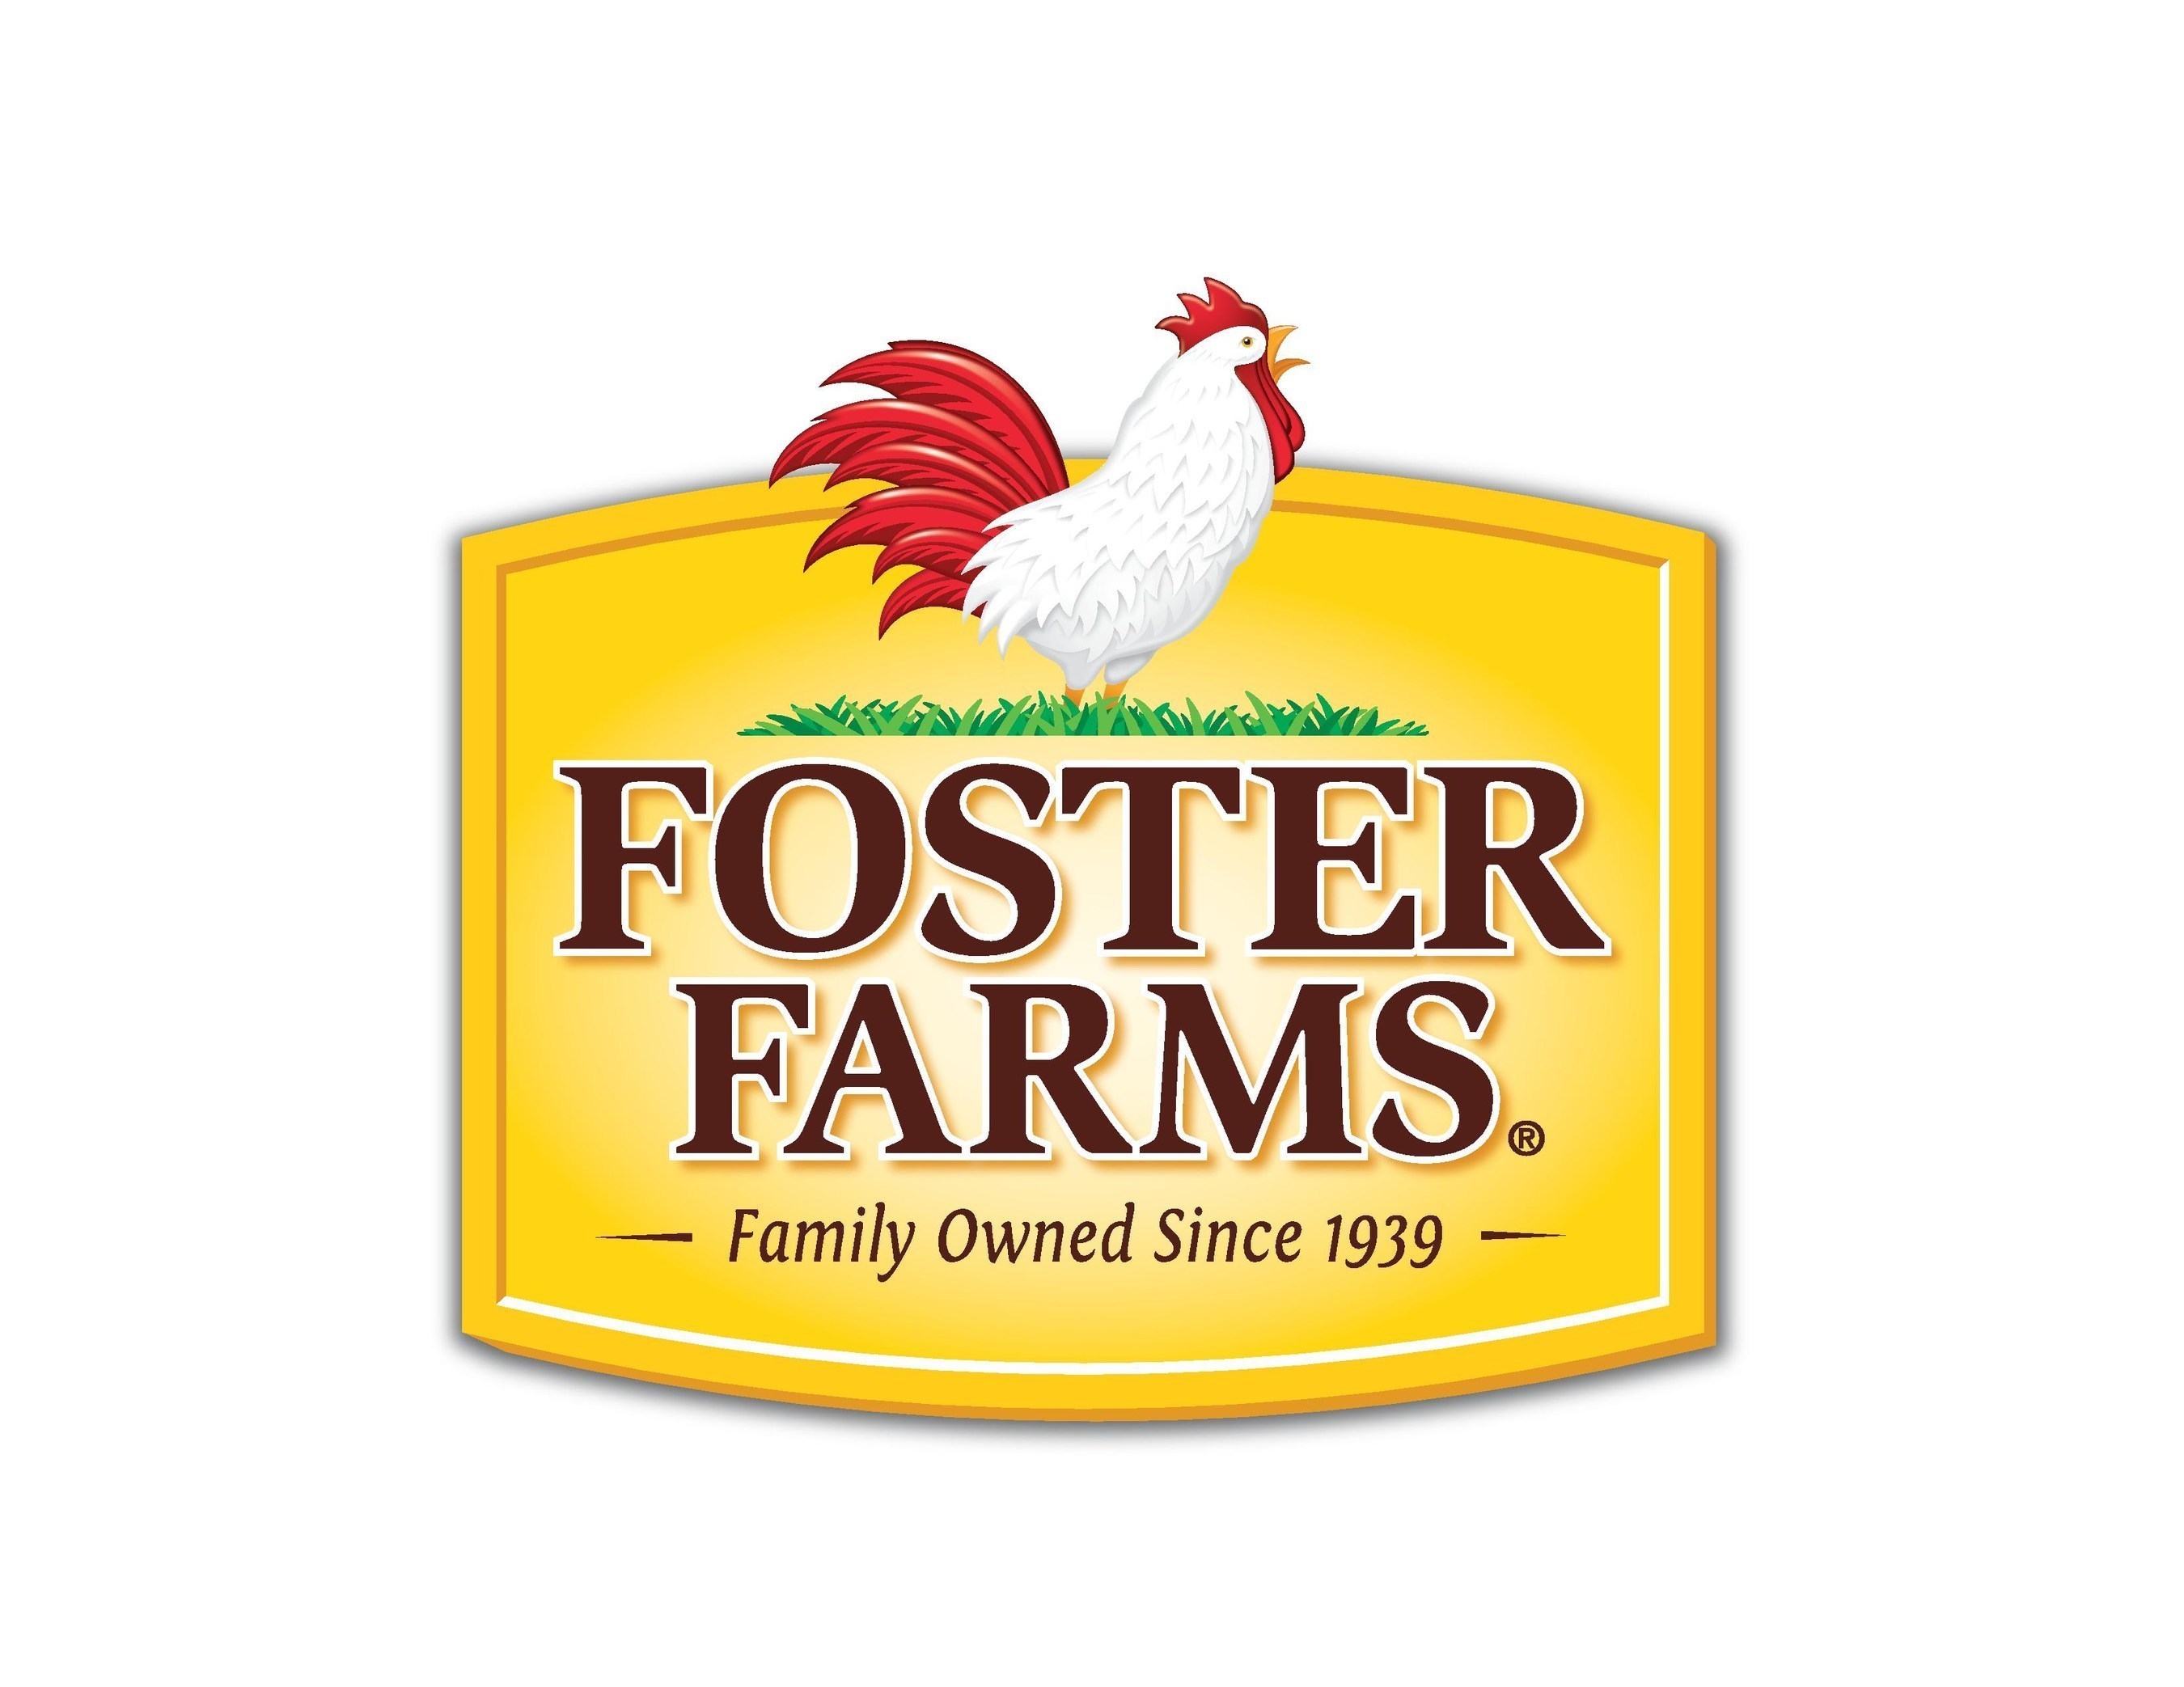 Foster Farms - Family Owned Since 1939 (PRNewsFoto/Foster Farms)